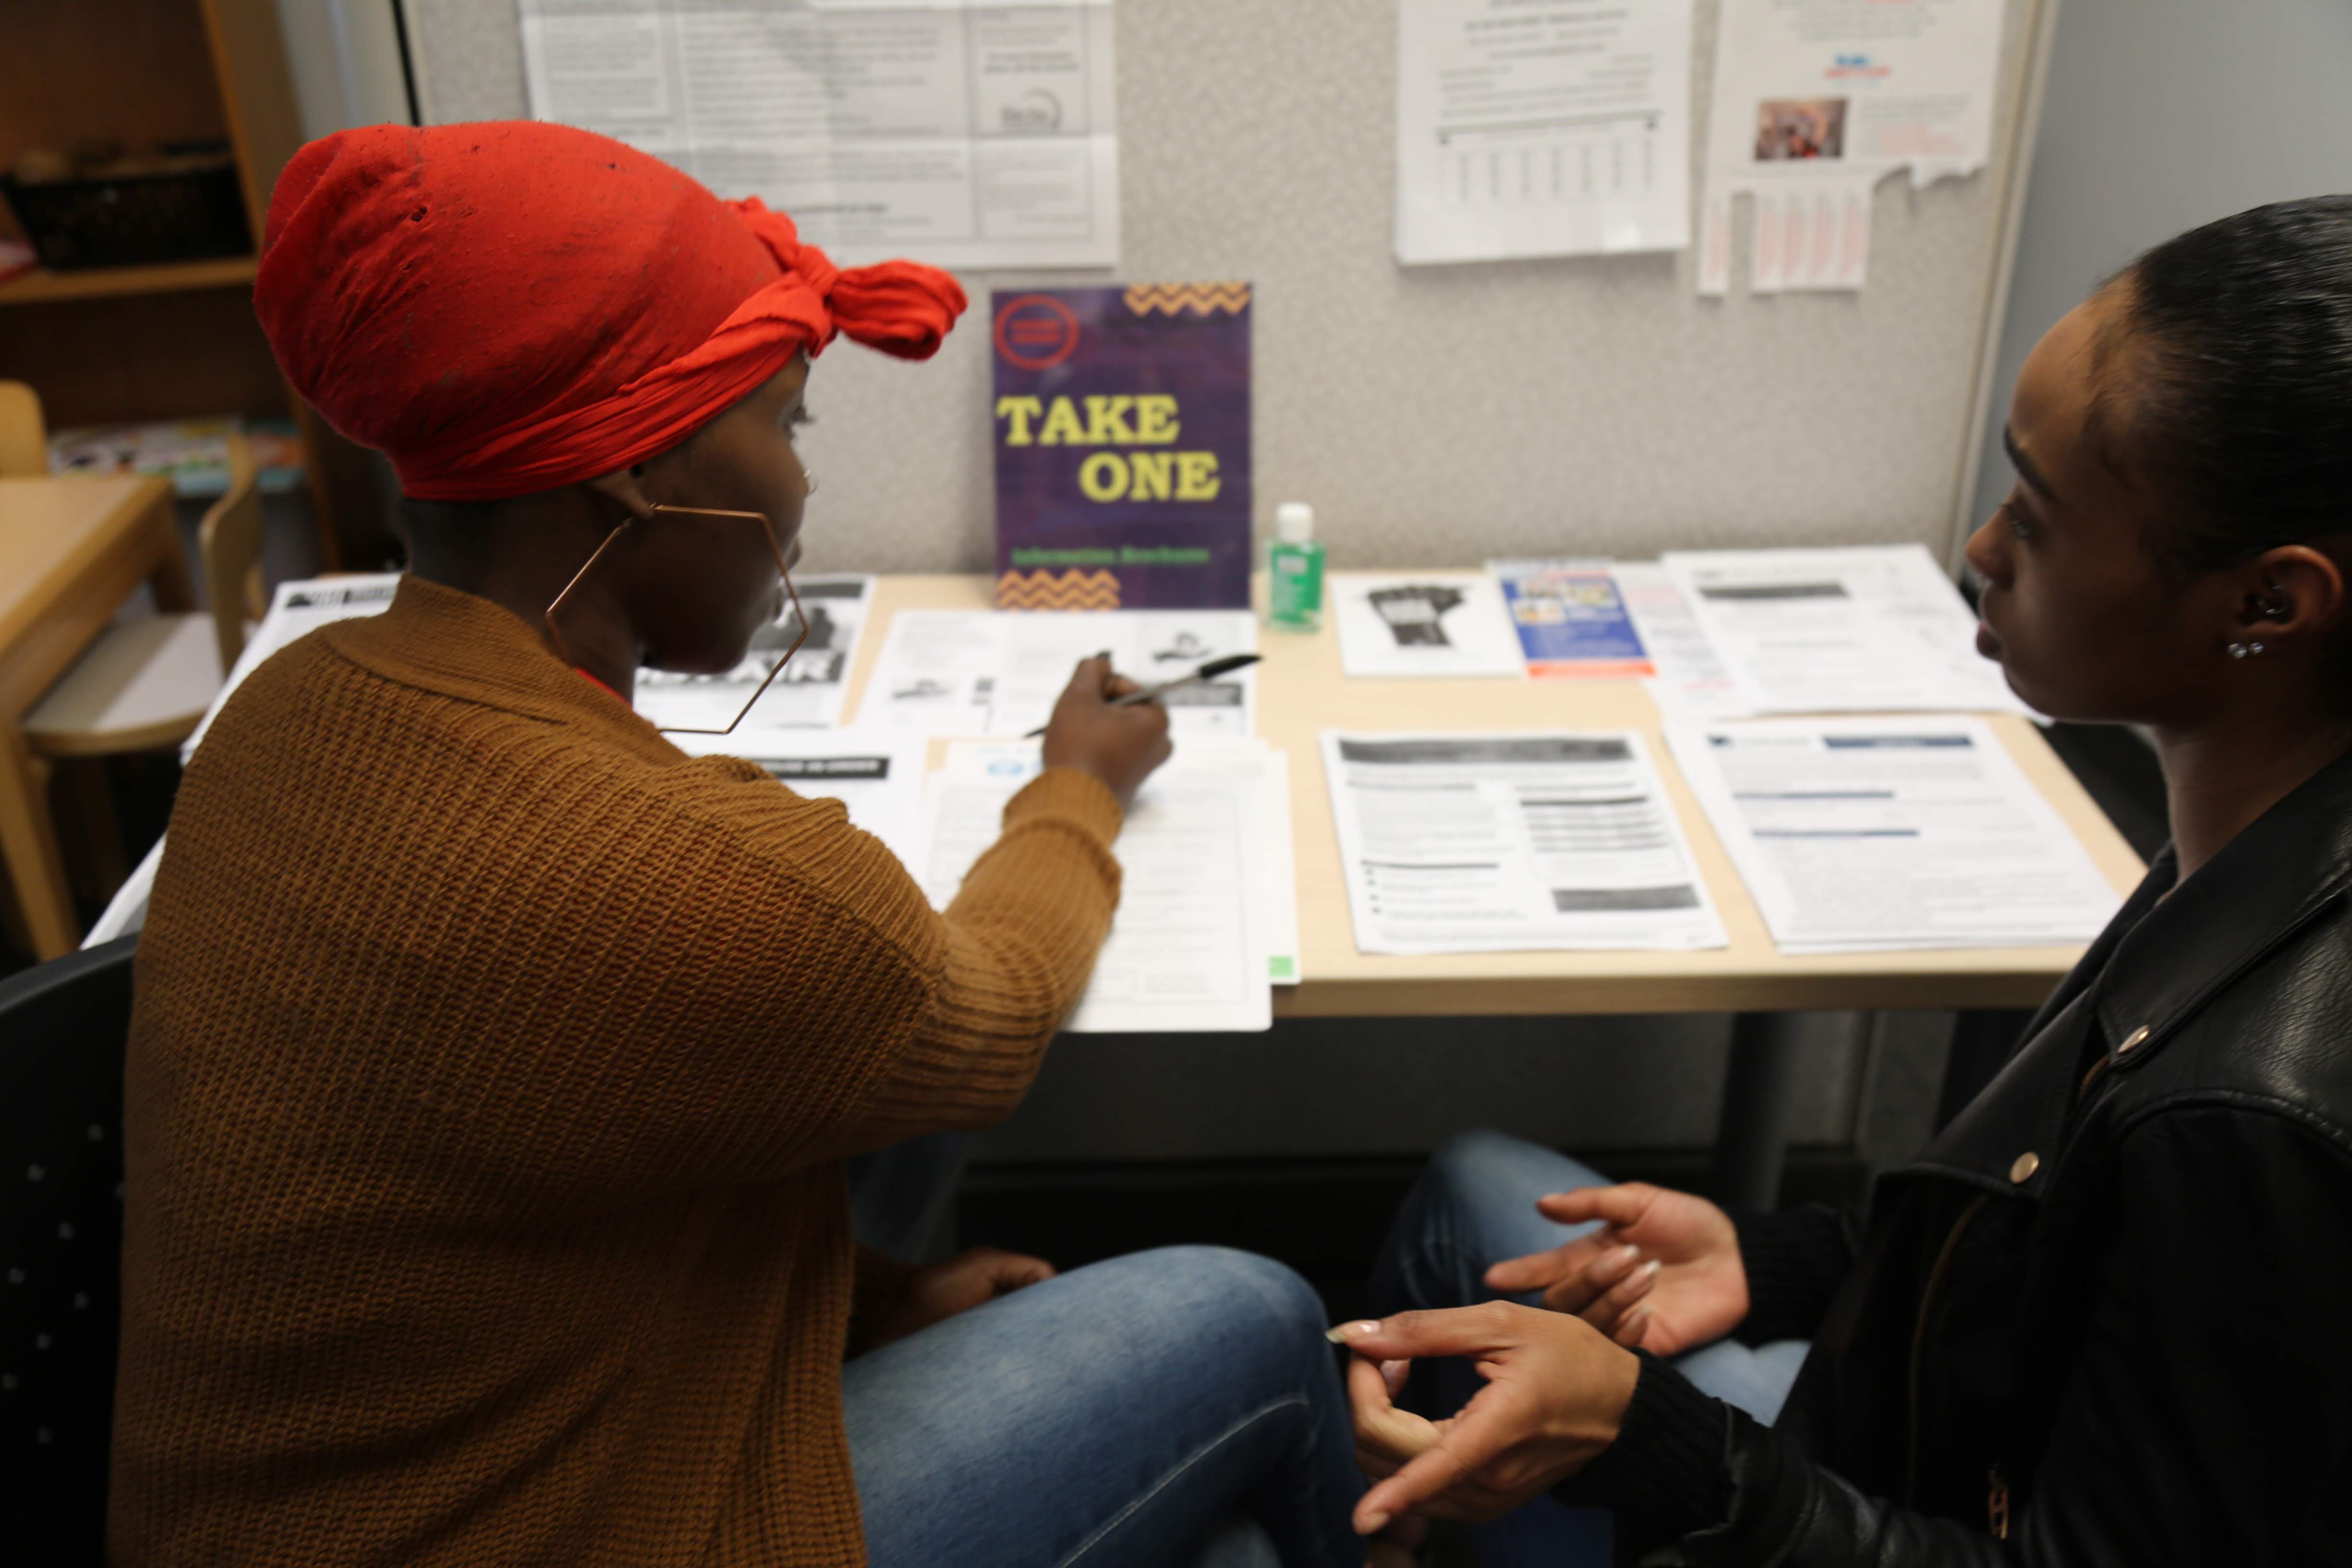 Two women discuss options in our Urban League resource center